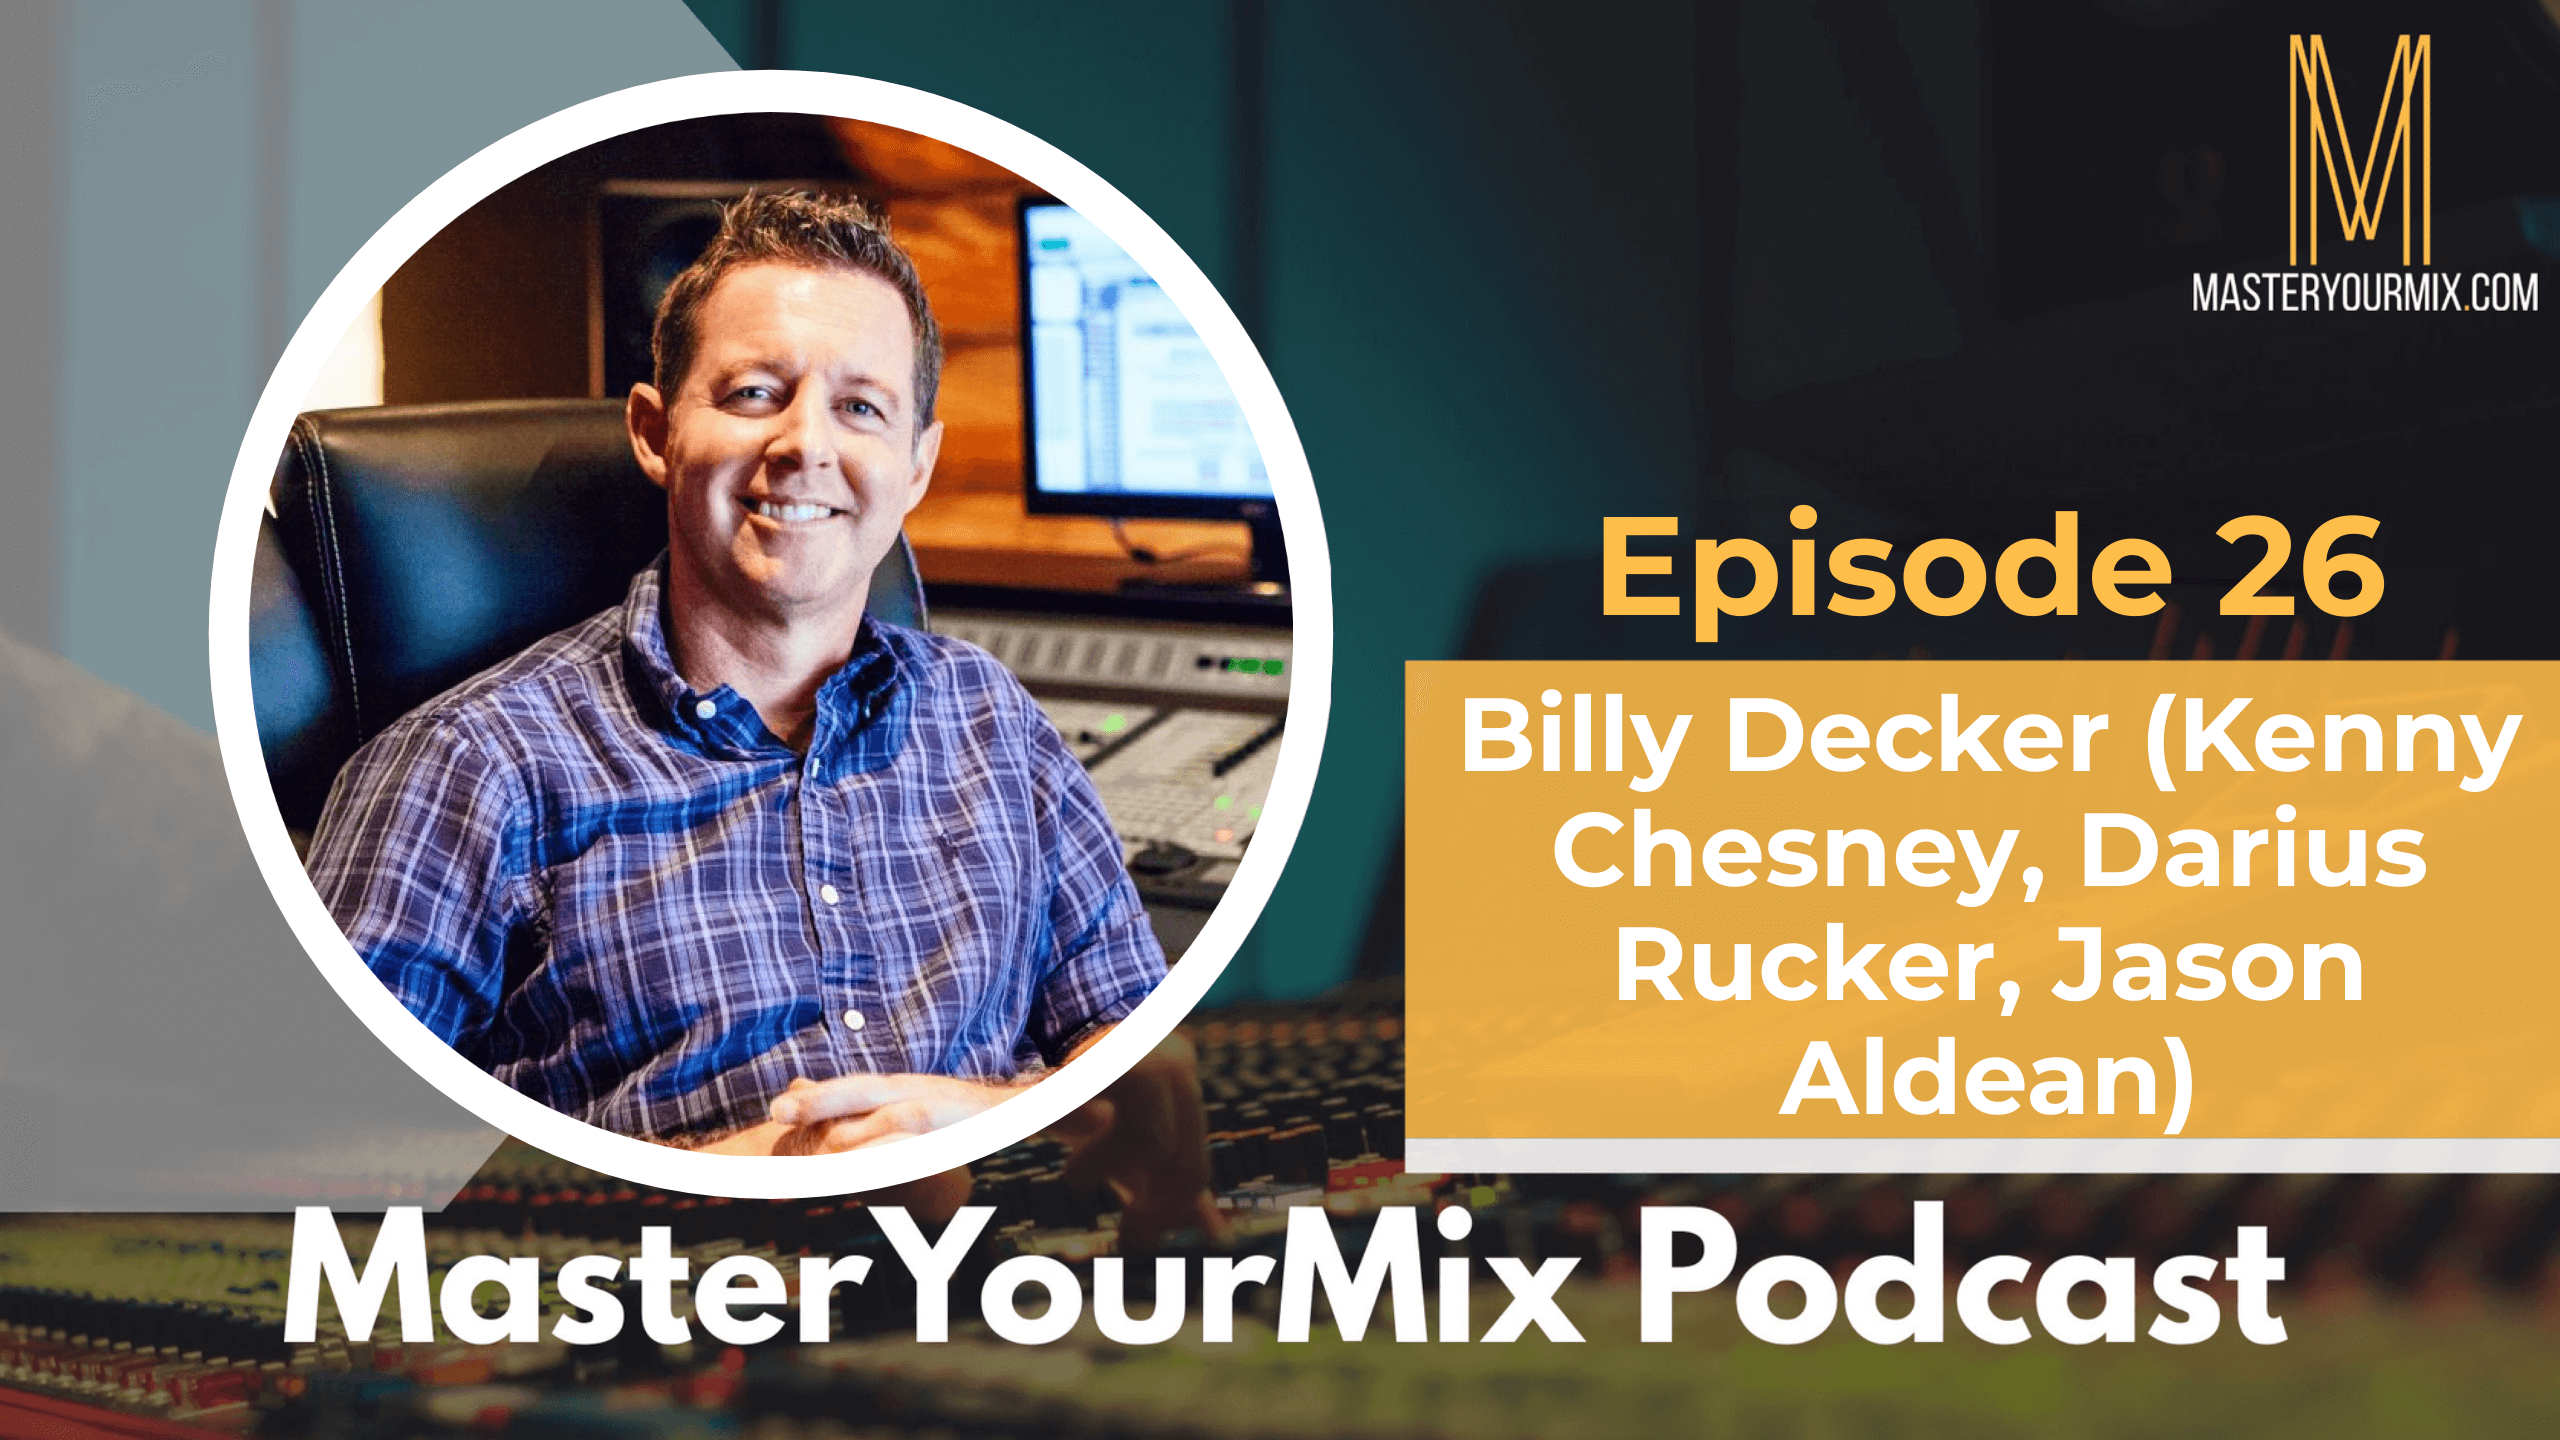 master your mix podcast, ep 26 billy decker